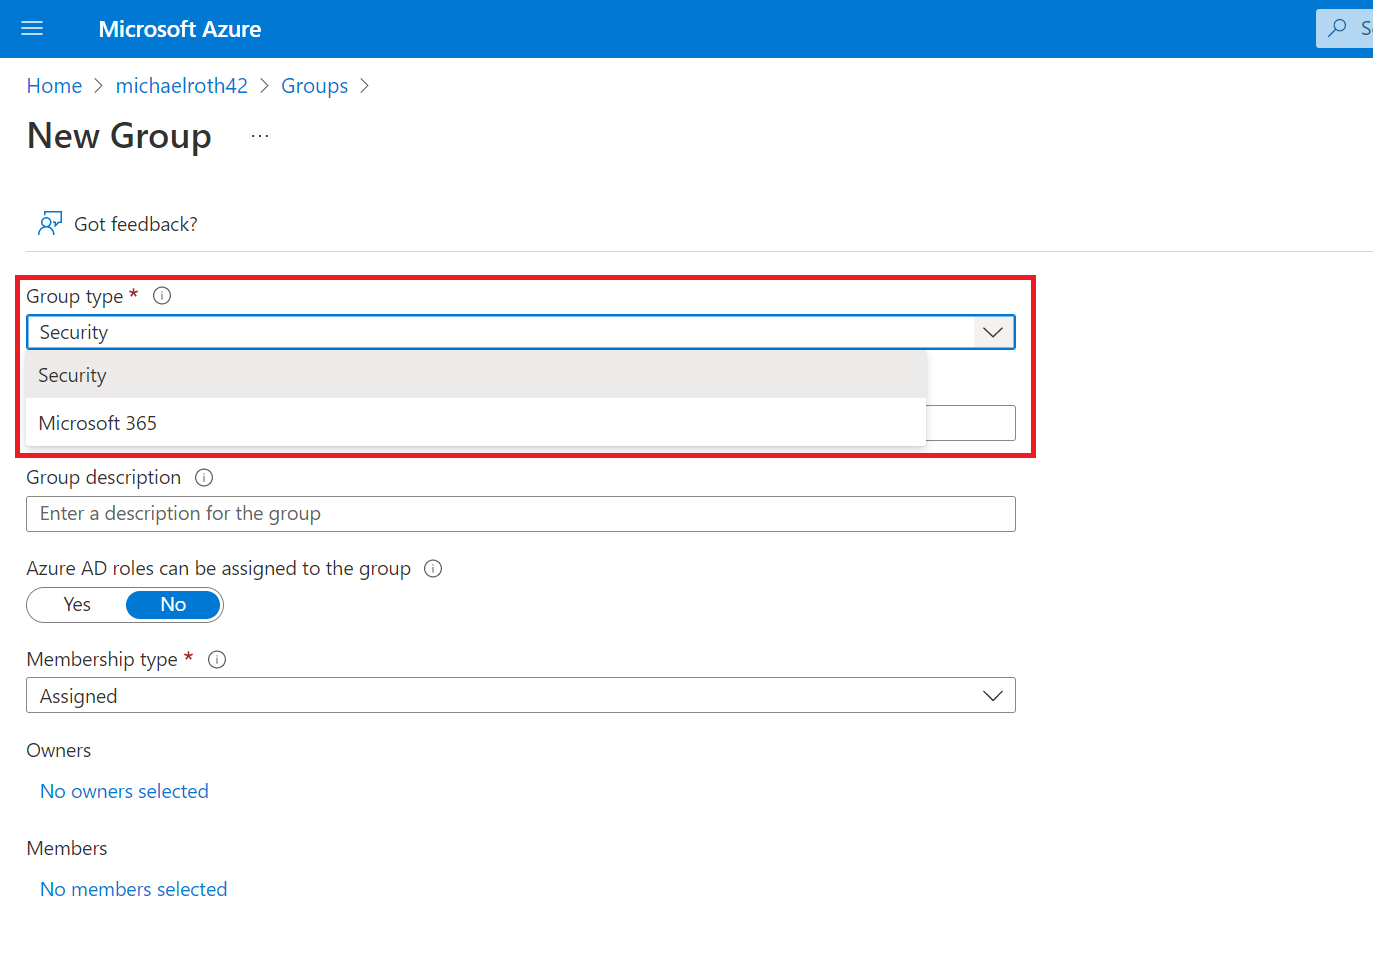 a picture the New Group menu in the azure portal